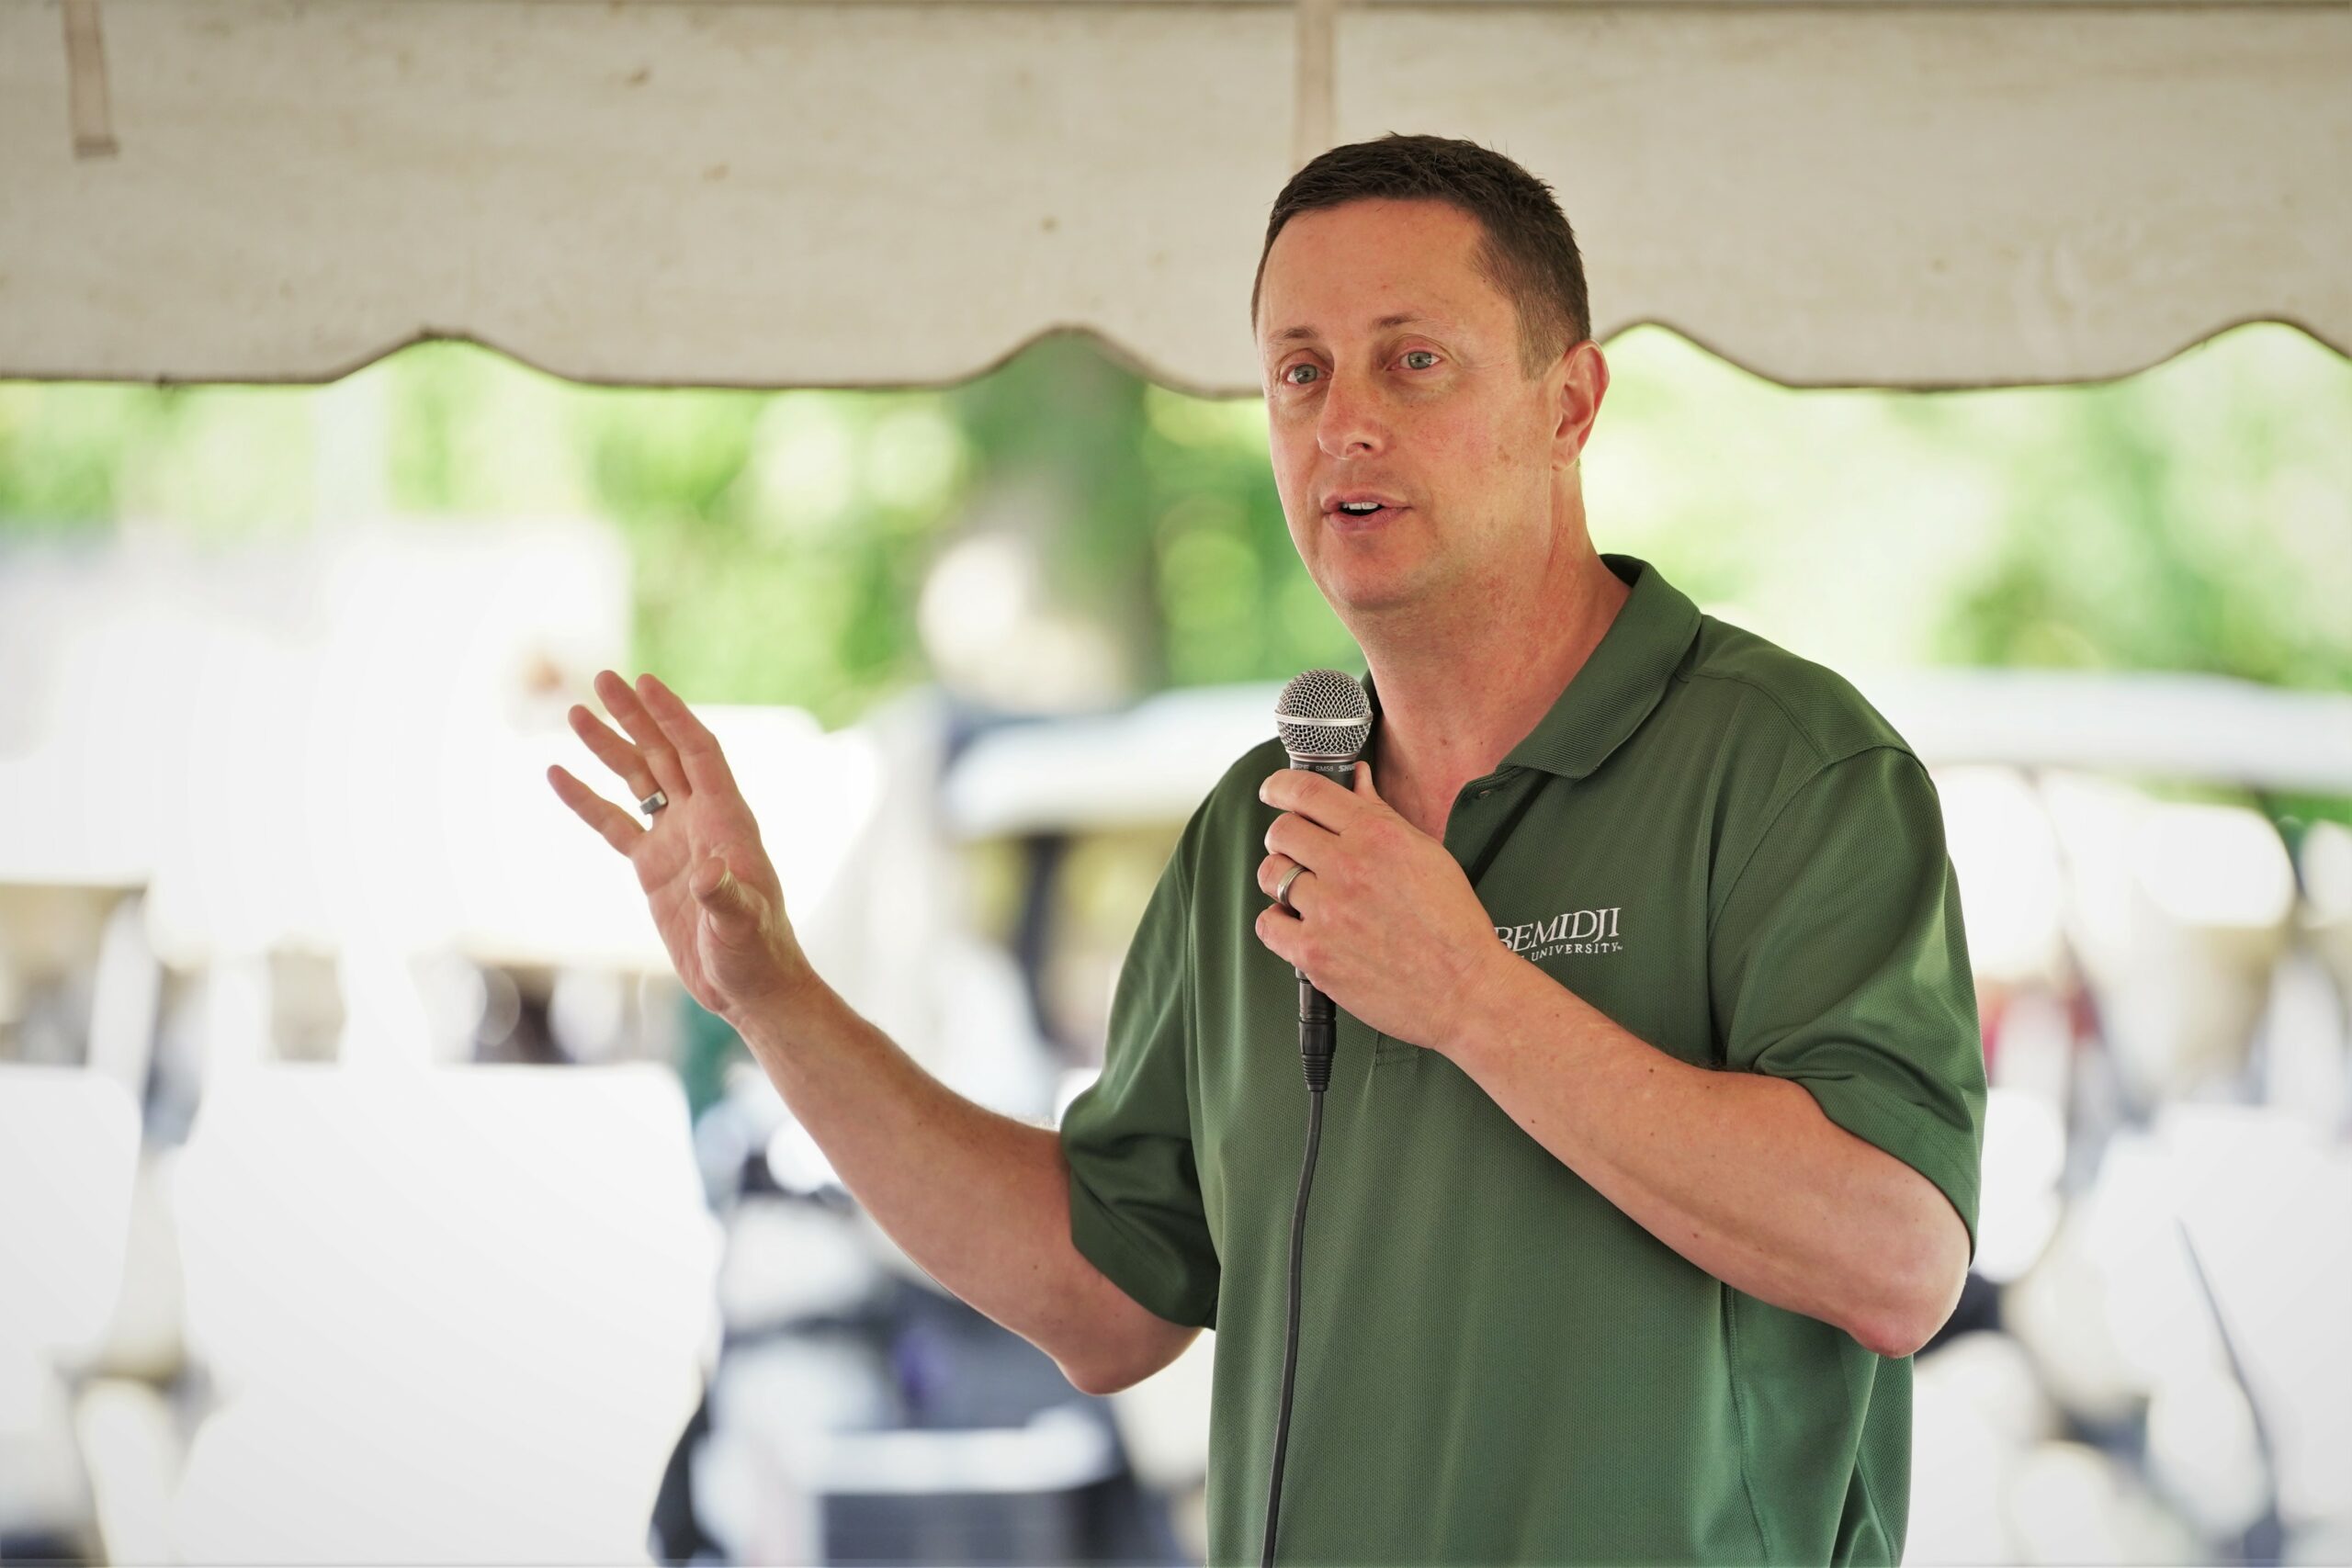 John L. Hoffman, the president of Bemidji State University and Northwest Technical College, delivers a speech during the Howe-Welle Women's Athletics Golf Tournament on Friday, Aug. 25, 2023, at the Bemidji Town and Country Club. (Micah Friez / Bemidji State)